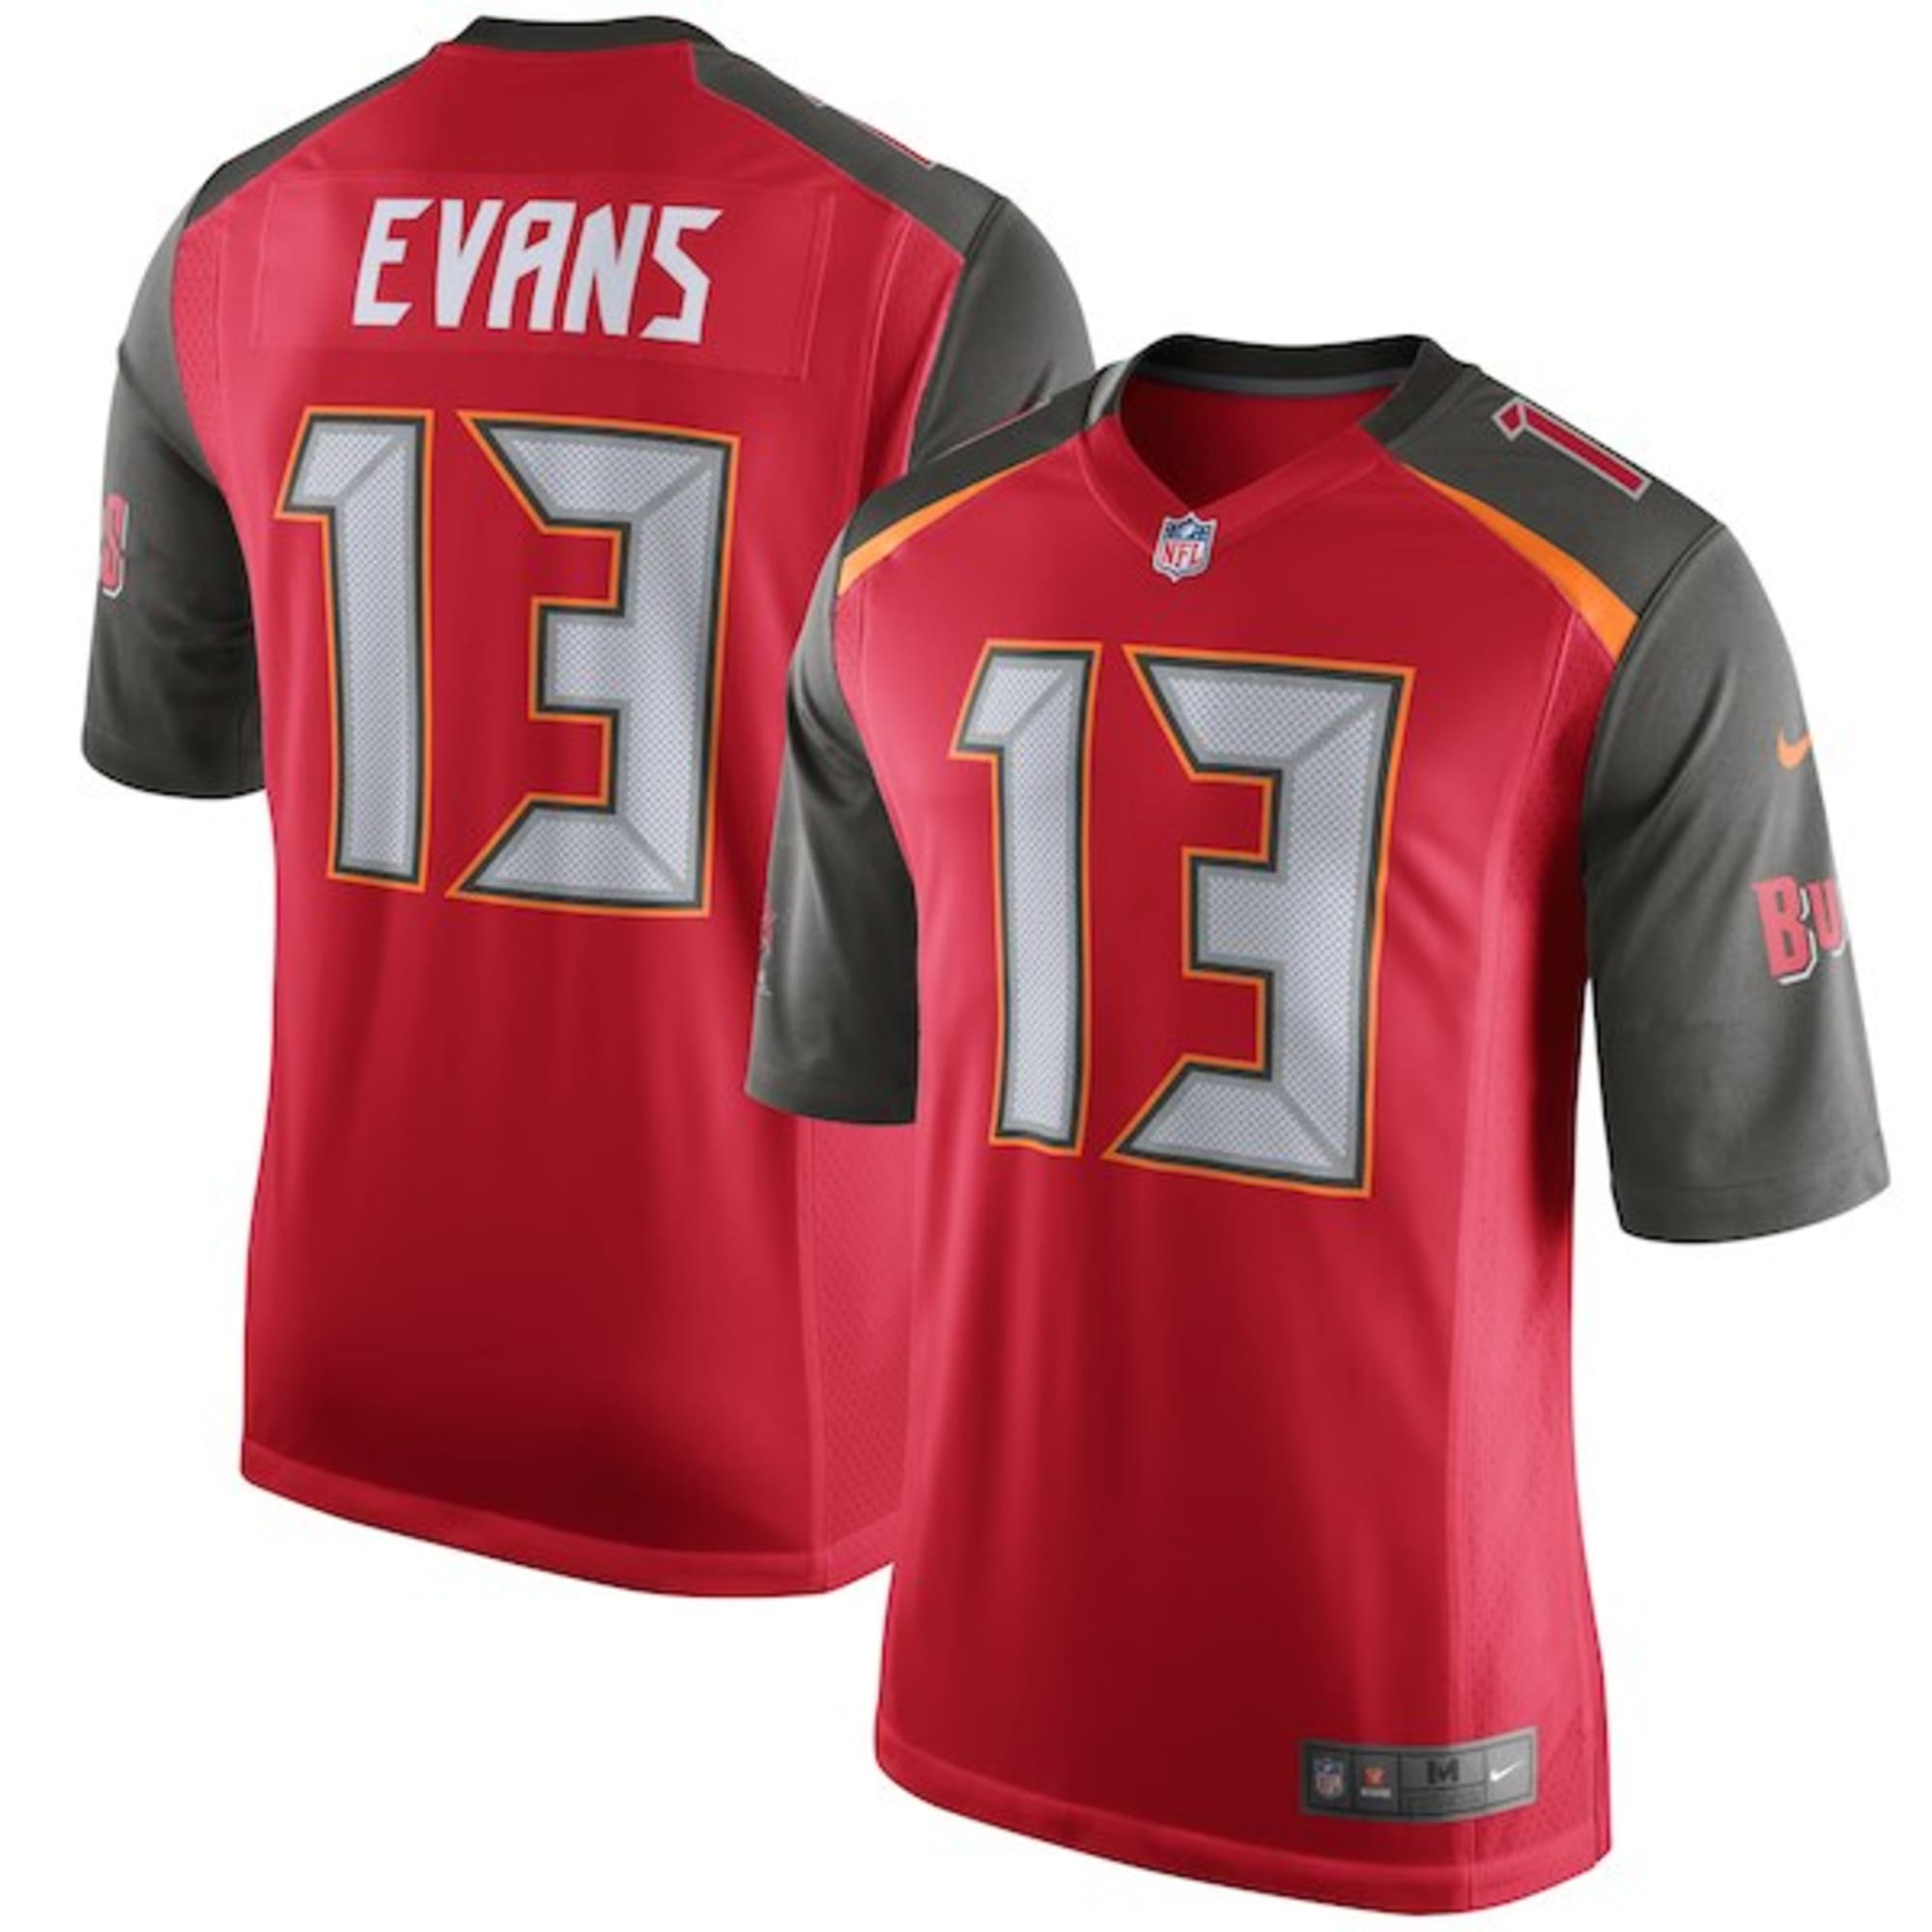 Must-have Tampa Bay Buccaneers gear for 2018-19